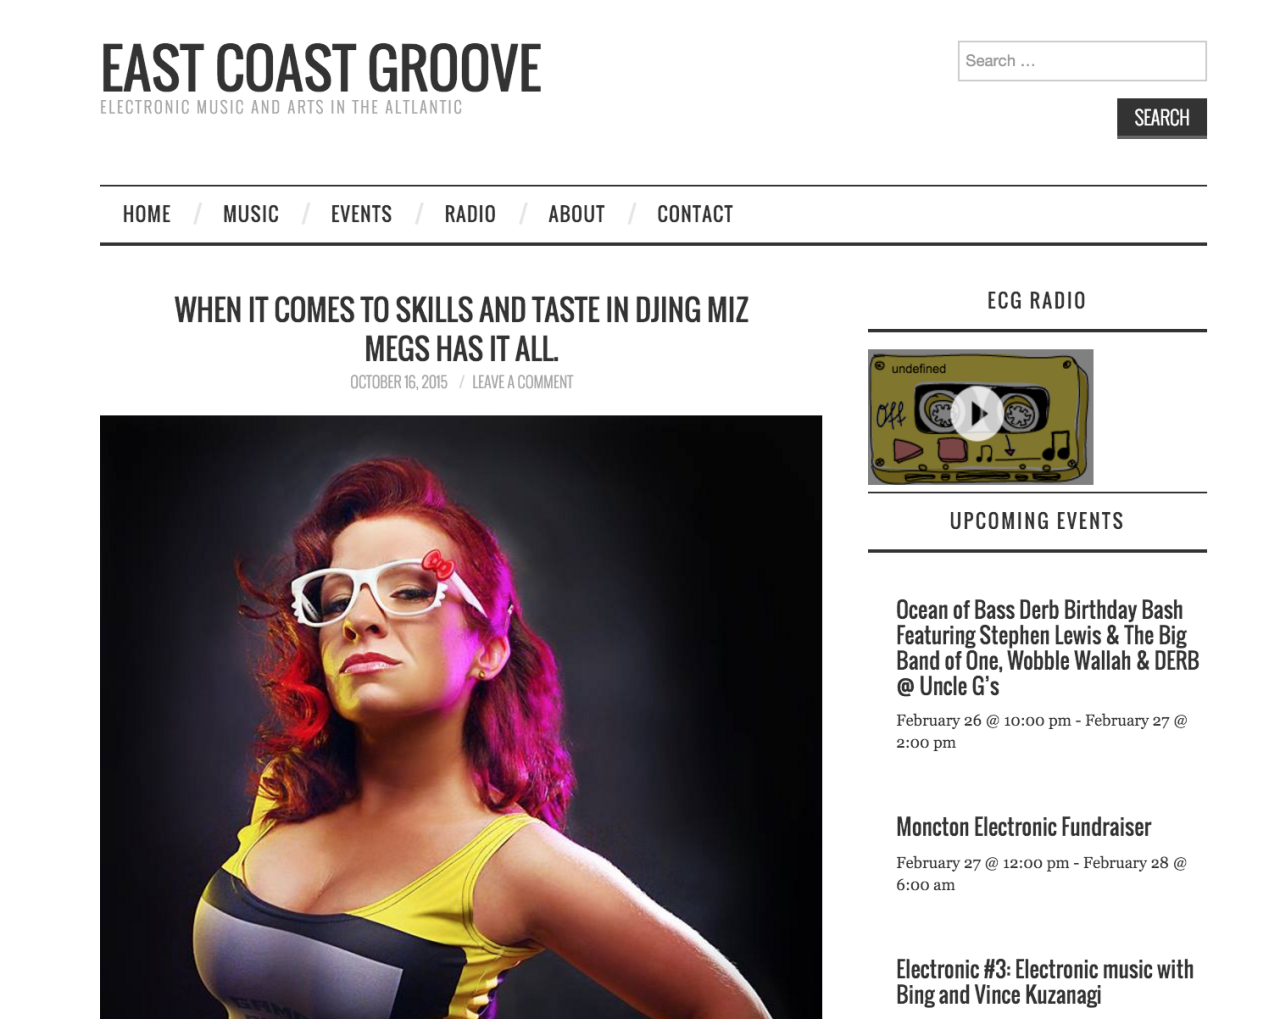 Check out this interview I did back in October for East Coast Groovehttp://www.eastcoastgroove.com/skills-taste-djing-miz-megs-all/#more-2684